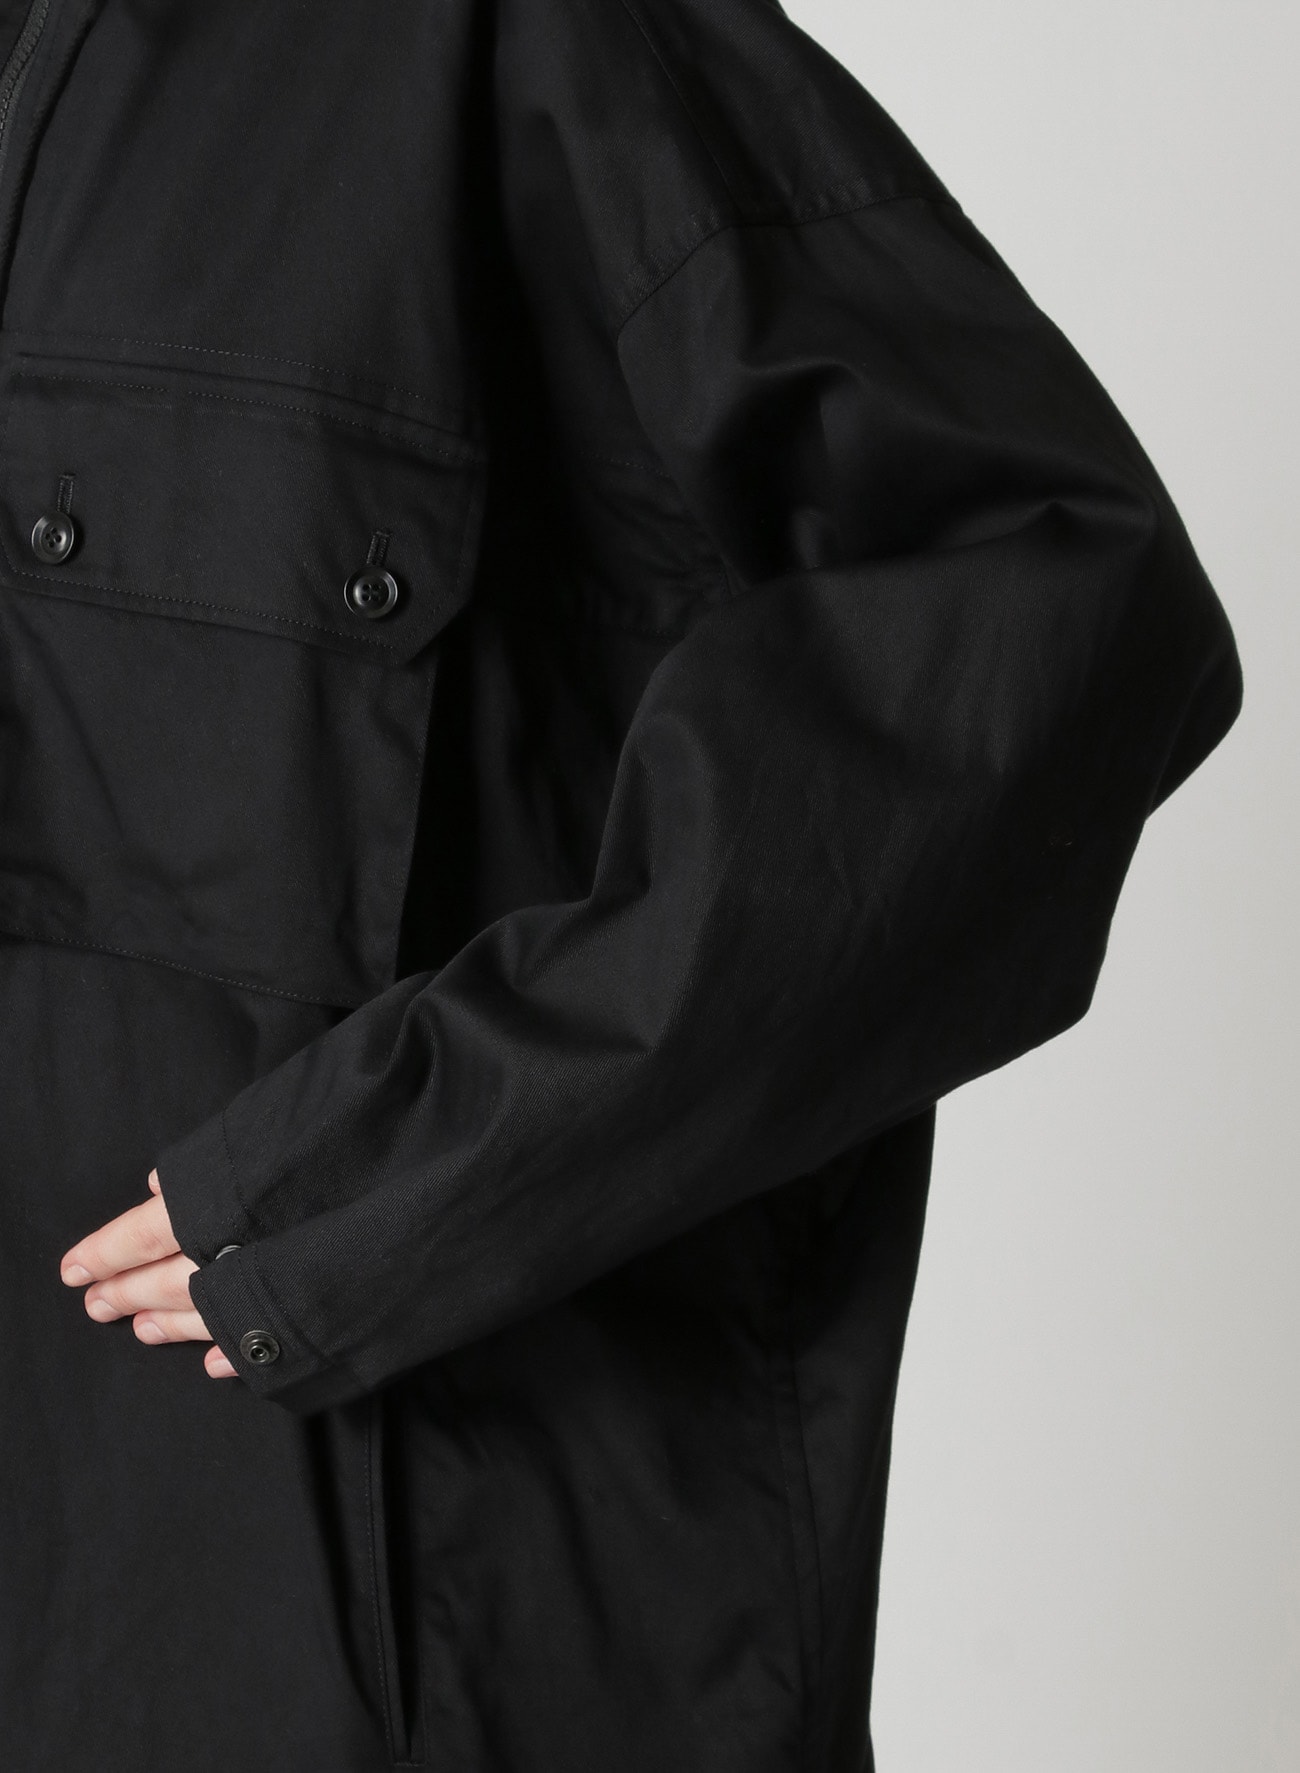 Y's BORN PRODUCT] COTTON TWILL HOODED COAT(XS BLACK): Y's|THE SHOP 